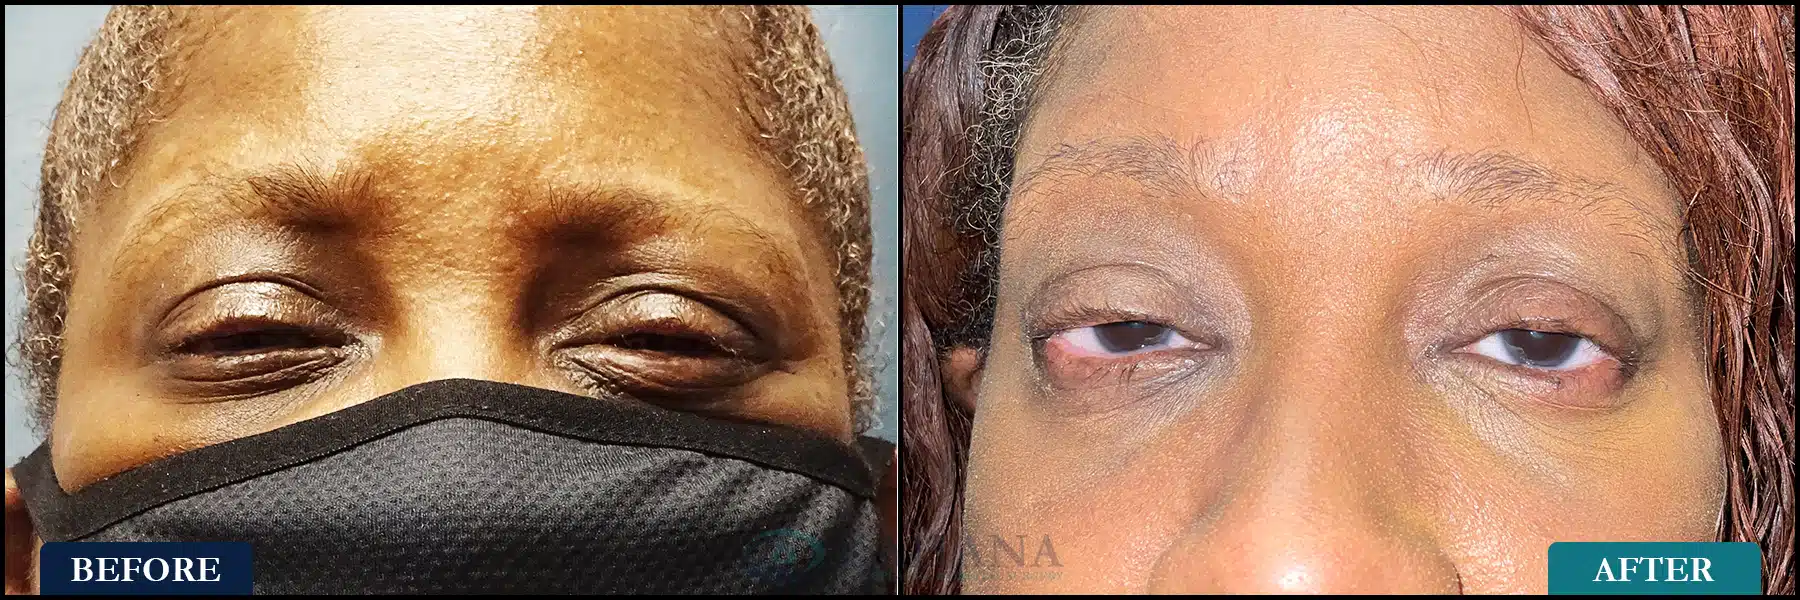 This is a patient with Stevens Johnson Syndrome who could hardly open her eyes when she first came to KOS due to eye pain and light sensitivity. She had a series of injections with 5FU, Acthar injections, and bilateral upper and lower eyelid fornix and lid margin reconstruction with buccal and amniotic membrane grafting. She now is comfortable, can open her eyes, and has significant improvement in vision. Post op over 1 year.